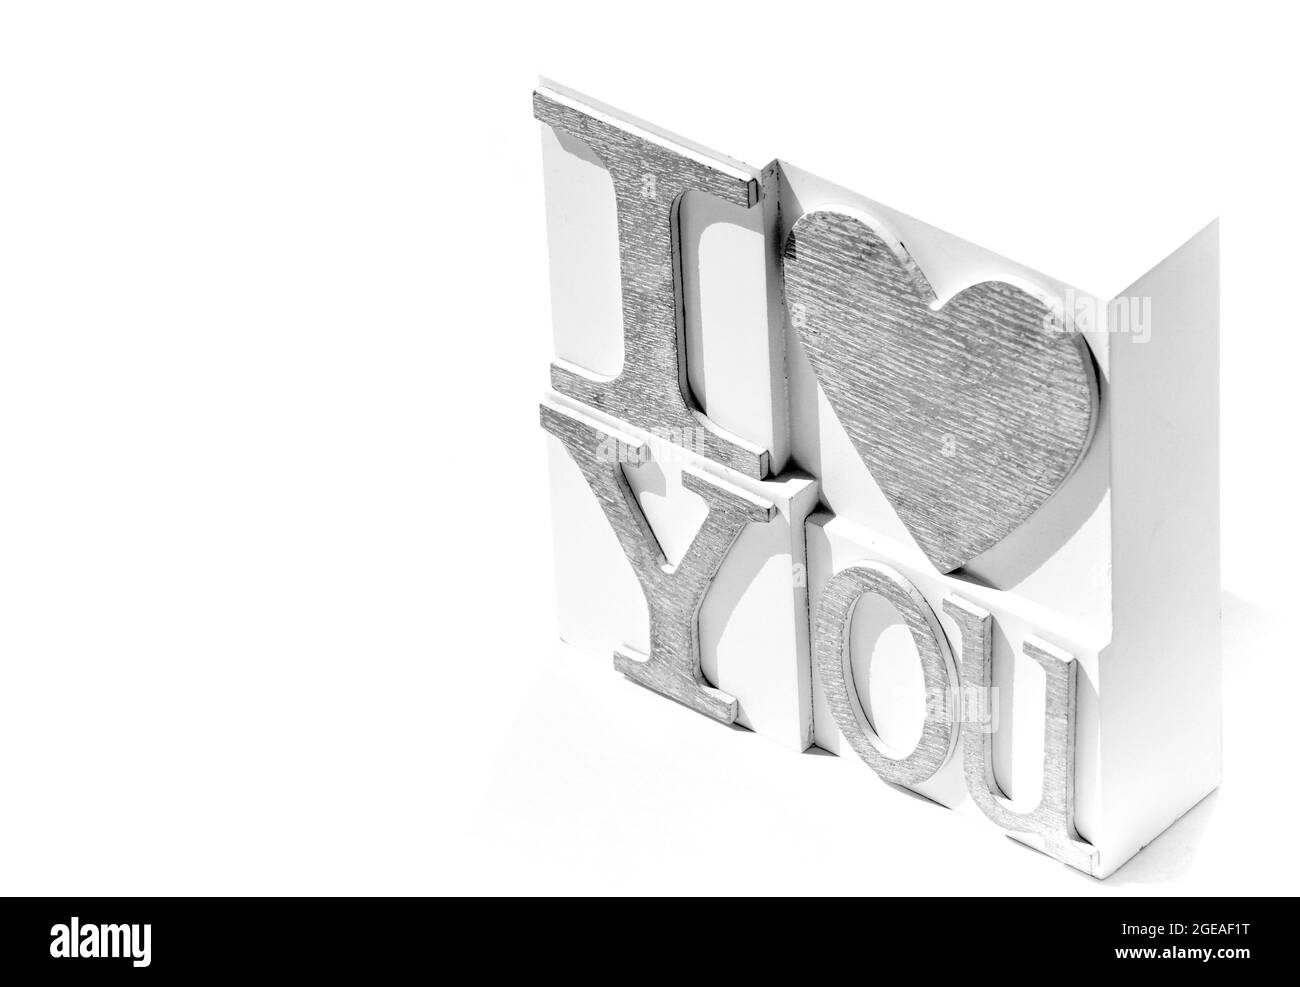 I Love You phrase set on a white tile. The image is against a white background and is in black and white. Copy space is available Stock Photo